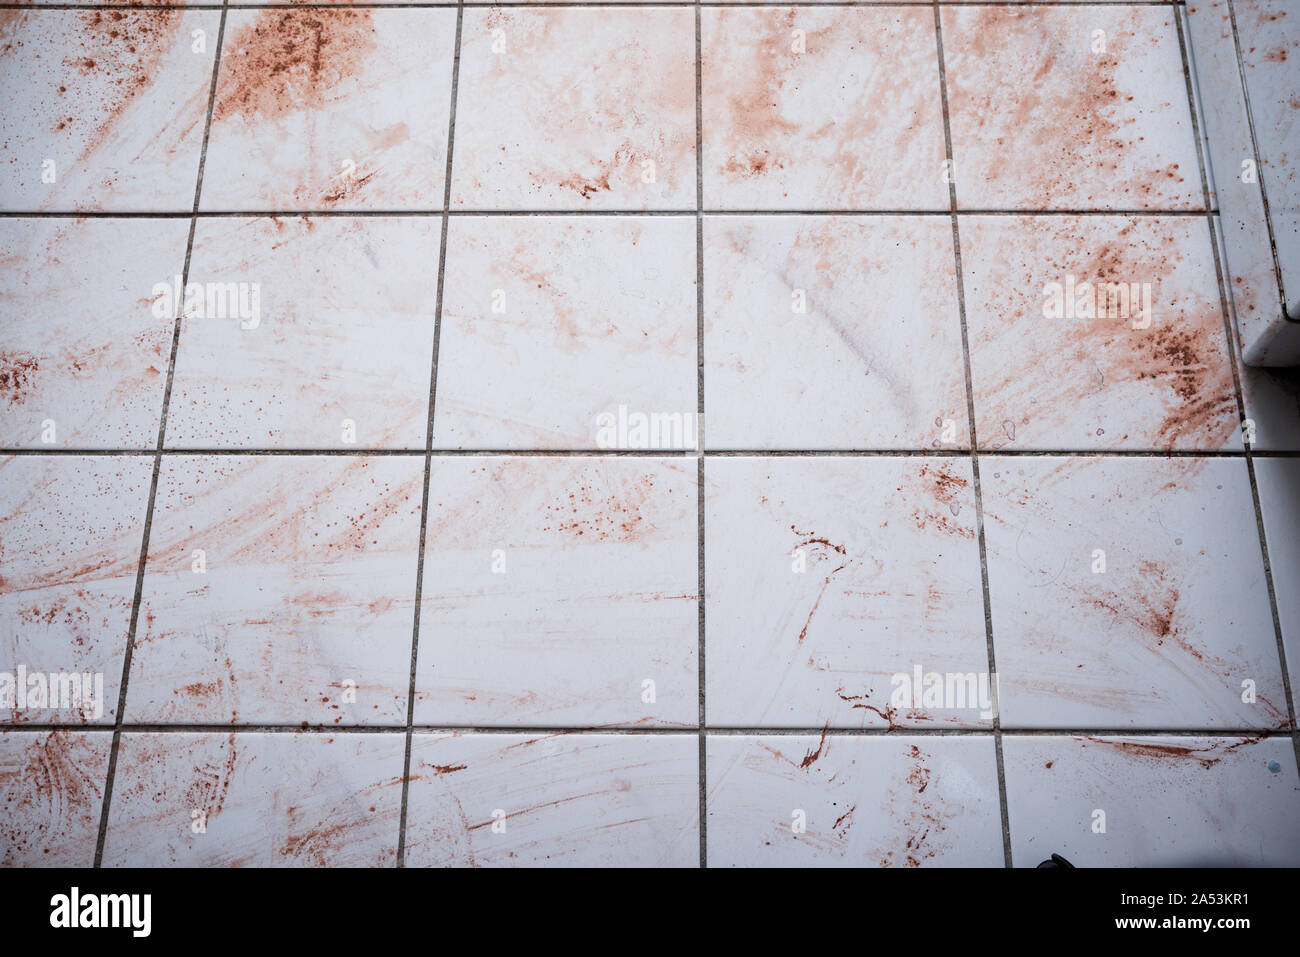 Tiled Floor With Spilled Food In Kitchen Stock Photo